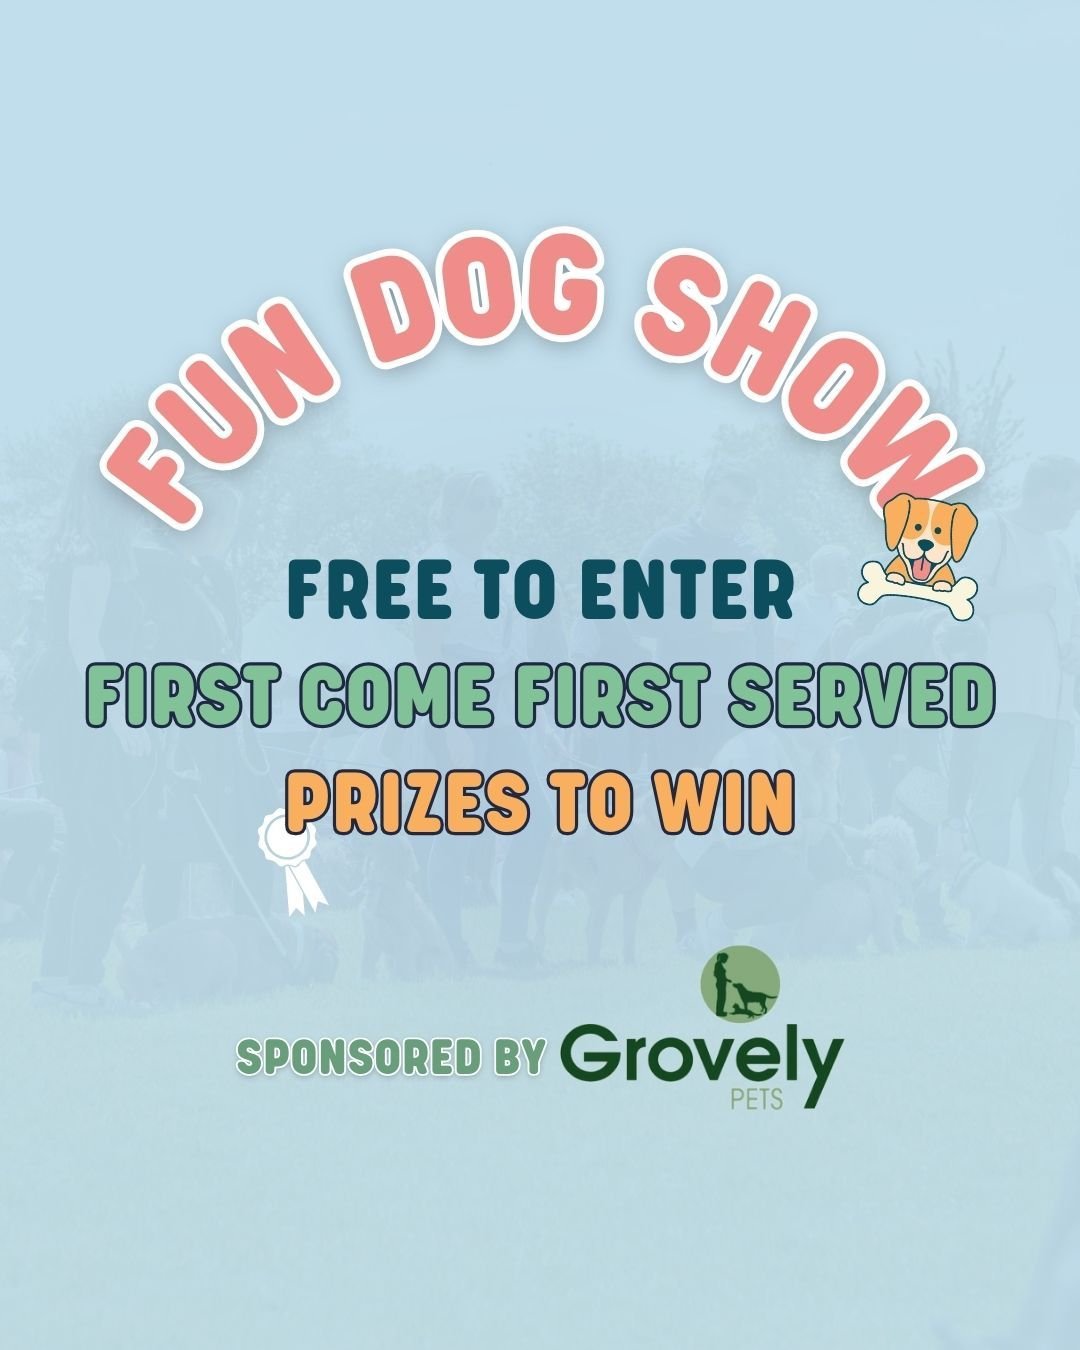 🏅FREE Fun Dog Show🏅for all ticket holders!

Do you think your dog has the waggiest tail, shiniest coat or looks most like their owner? Make sure to enter the FREE Fun dog show at Dogs Day Out, hosted by former BBC Presenter Neil Pringle.

🦴12 DIFF